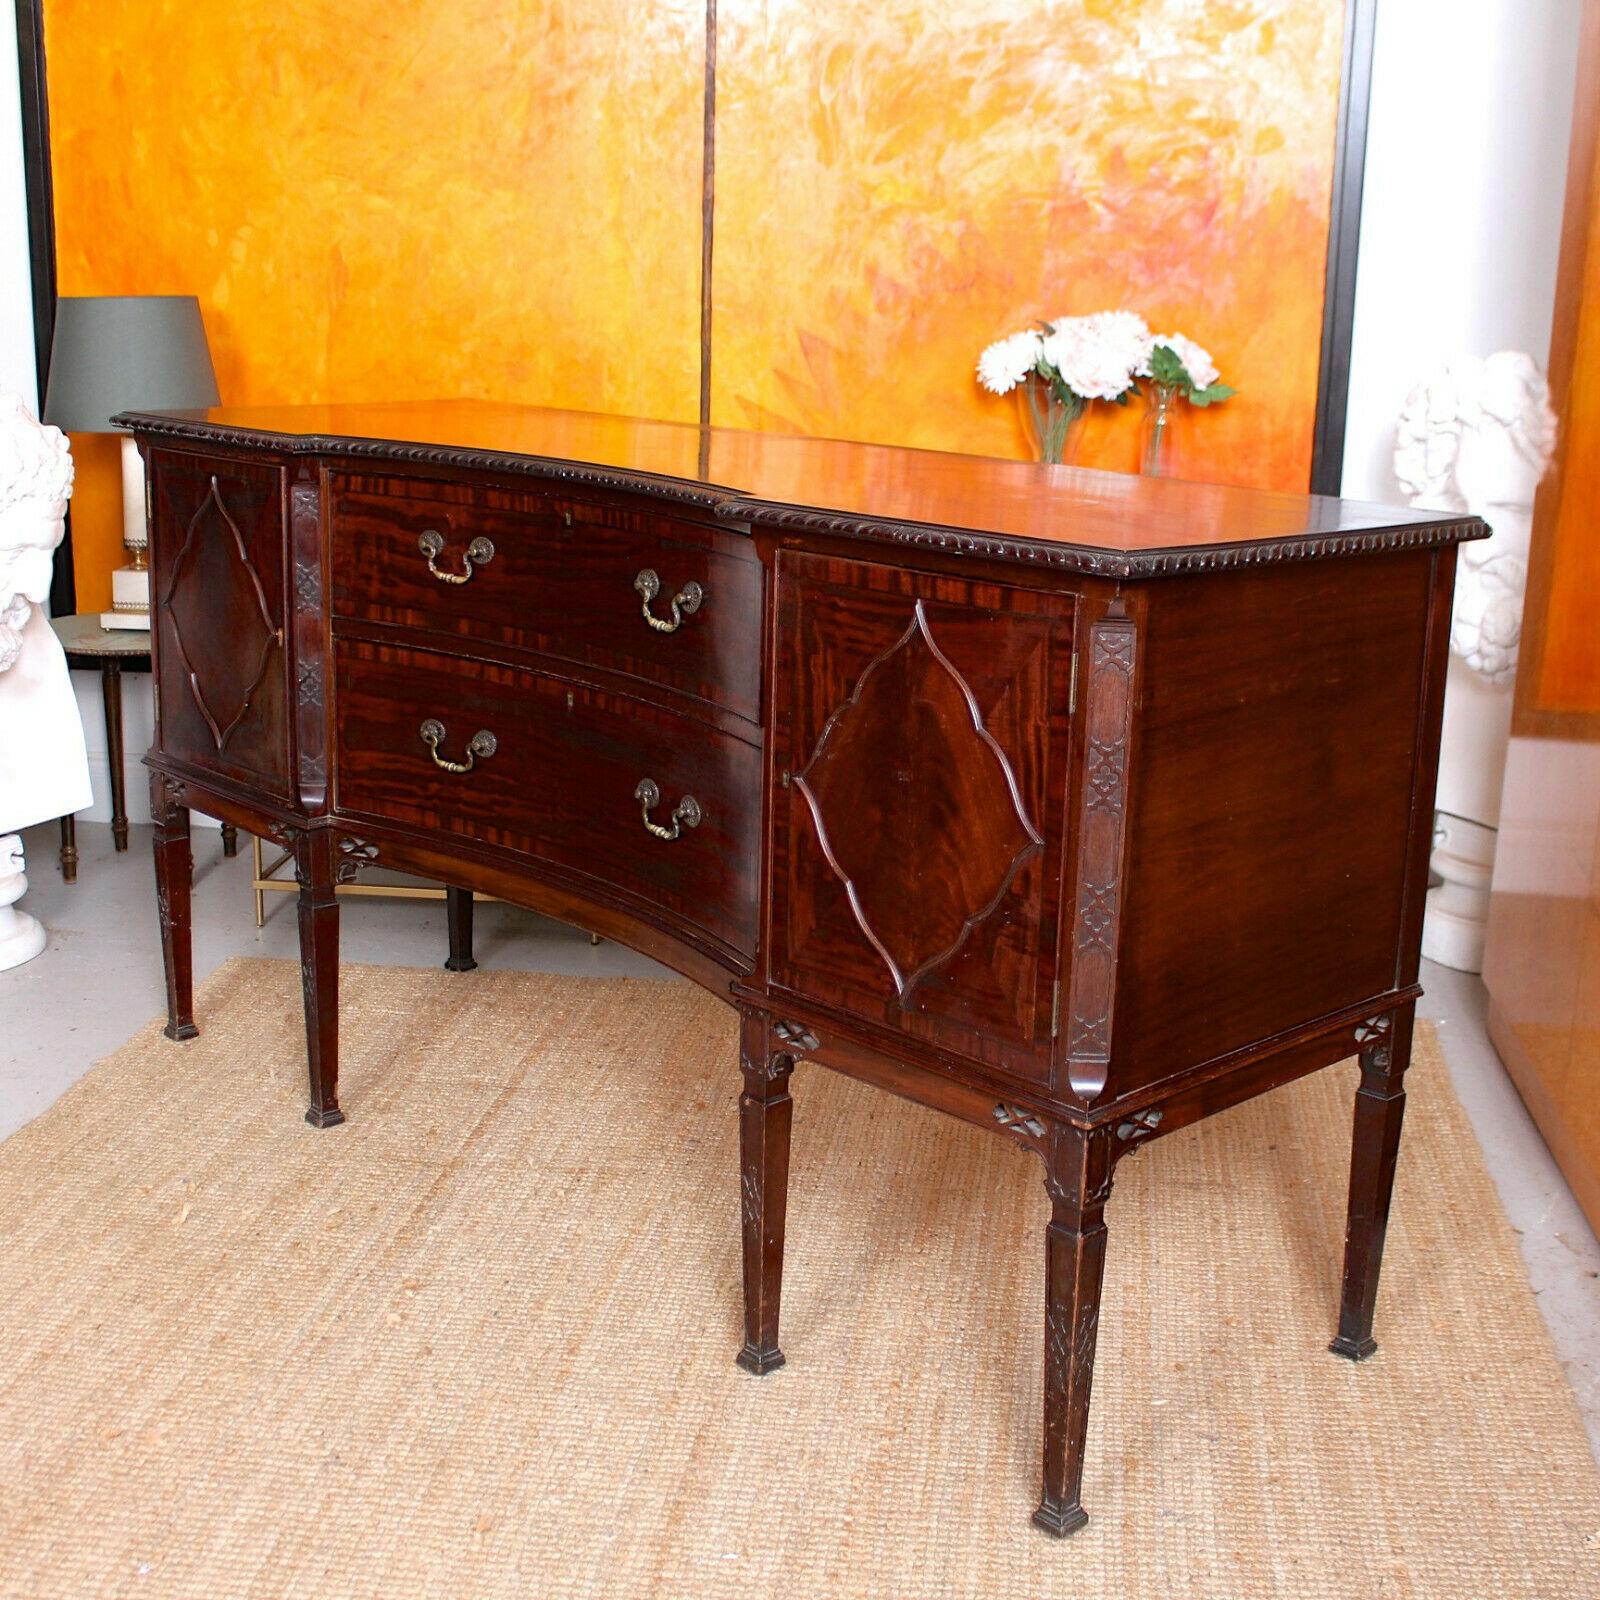 The Cuban mahogany boasting an impressive flamed grain and rich patina.
The top with intricately carved and moulded chamfered edges. The central concave form front drawers mounted with good handles, dovetailed jointing and clean interiors. Flanked